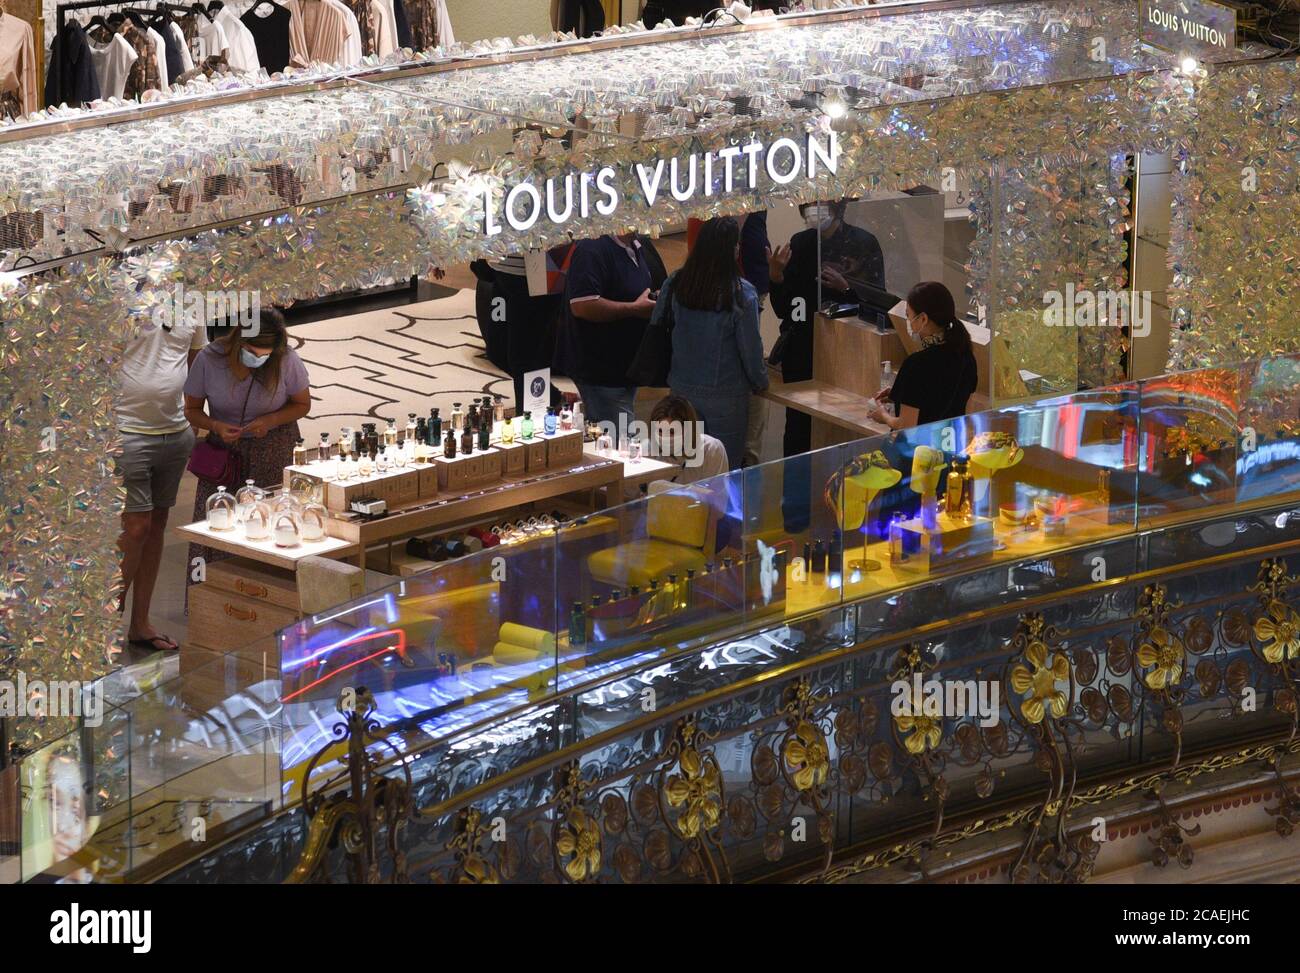 *** STRICTLY NO SALES TO FRENCH MEDIA OR PUBLISHERS - RIGHTS RESERVED ***August 03, 2020 - Paris, France: Clients with face masks against the coronavirus in a Louis Vuitton stall in the Galeries Lafayette megastore. Luxury brand stores in Paris are badly affected by Covid crisis, with wealthy tourists staying away due to travel restrictions and coronavirus fears. Vue sur un stand Louis Vuitton dans les Galeries Lafayette. Les boutiques de luxe font face a une chute de leur clientele traditionnelle du fait de la crise du Covid-19 et des restrictions de voyage. Stock Photo